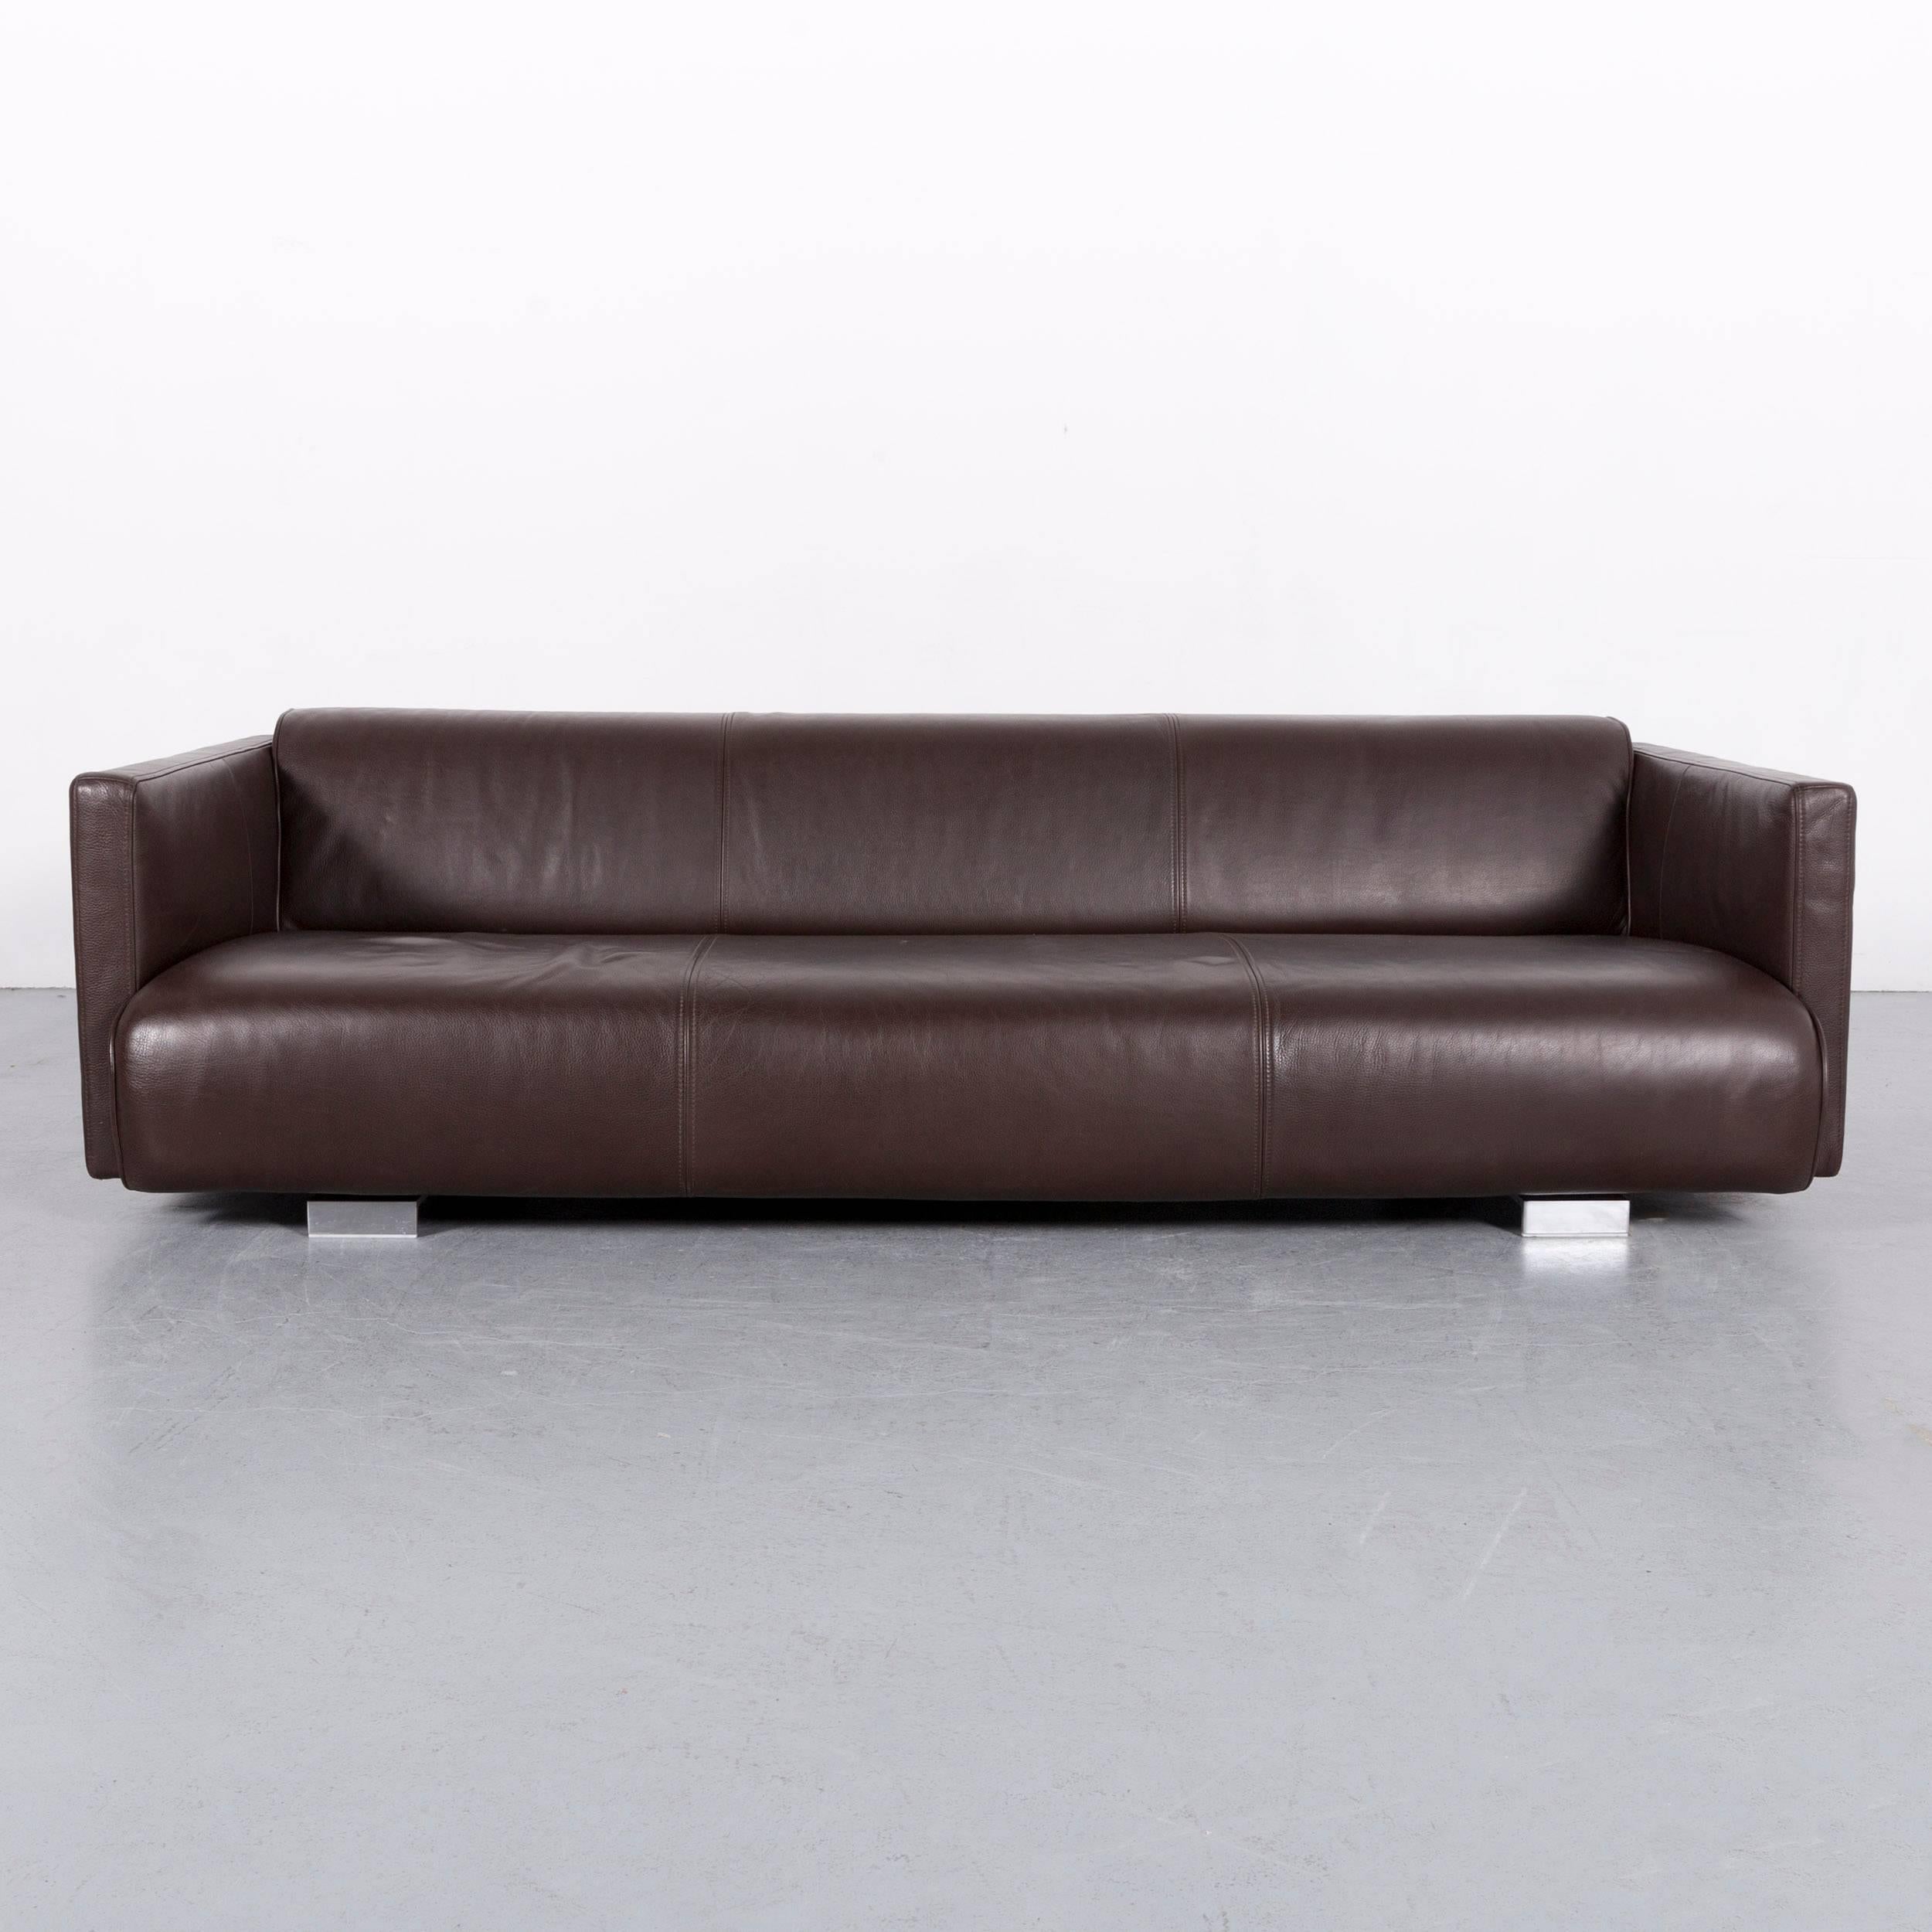 We bring to you an Rolf Benz 6300 sofa set leather brown three-seat bench.